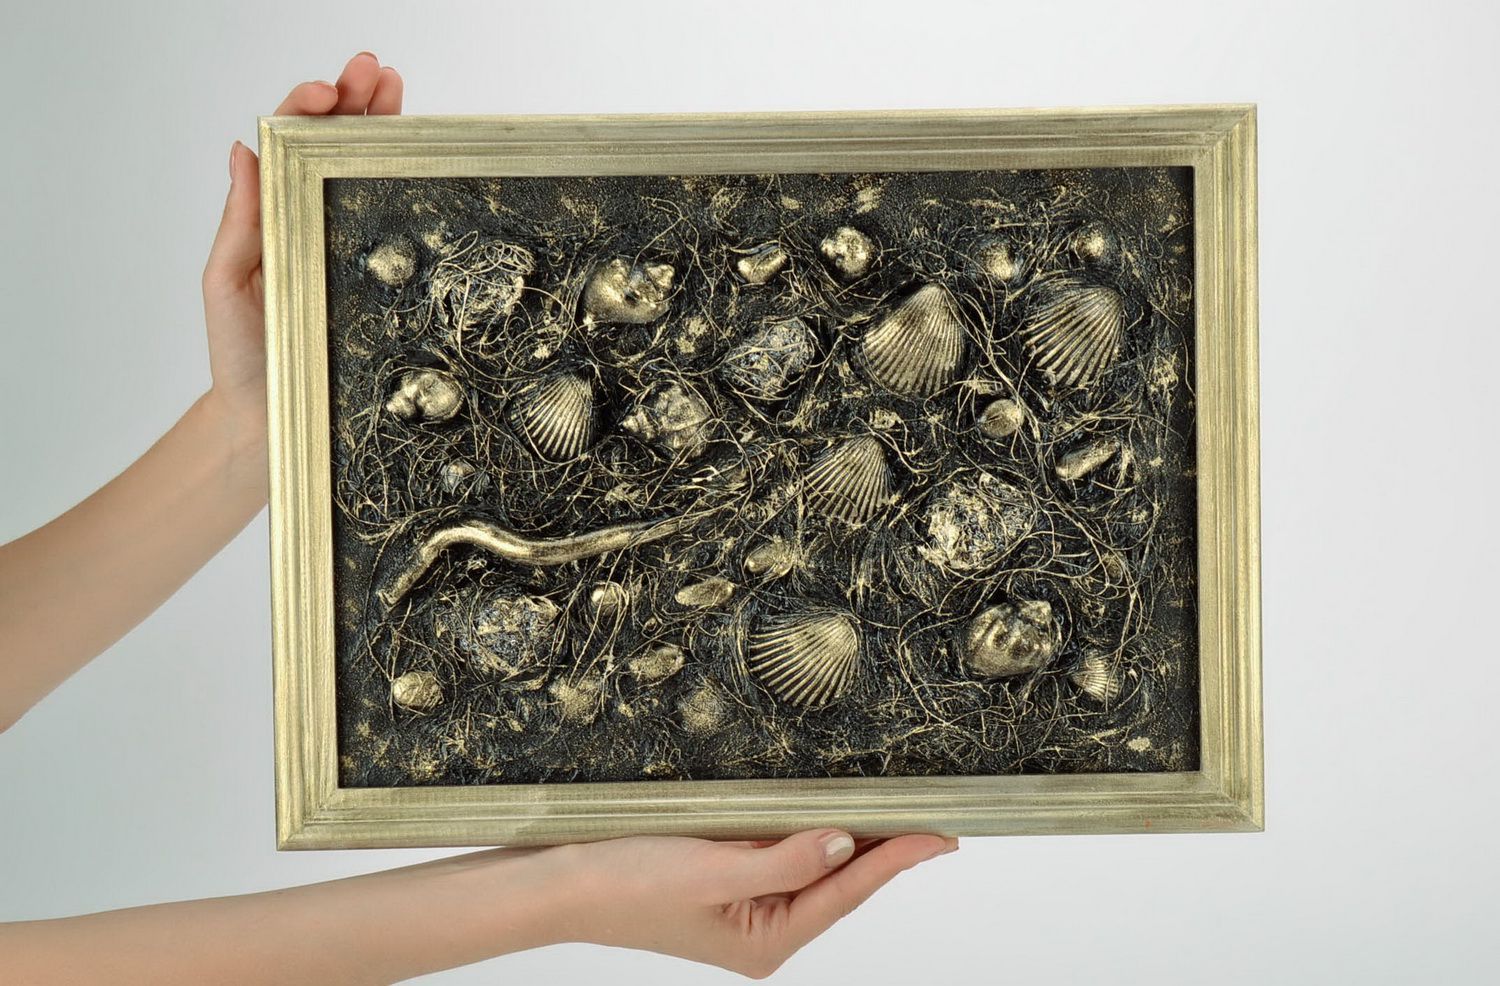 Panel picture with shells and dried flowers Sea world photo 1